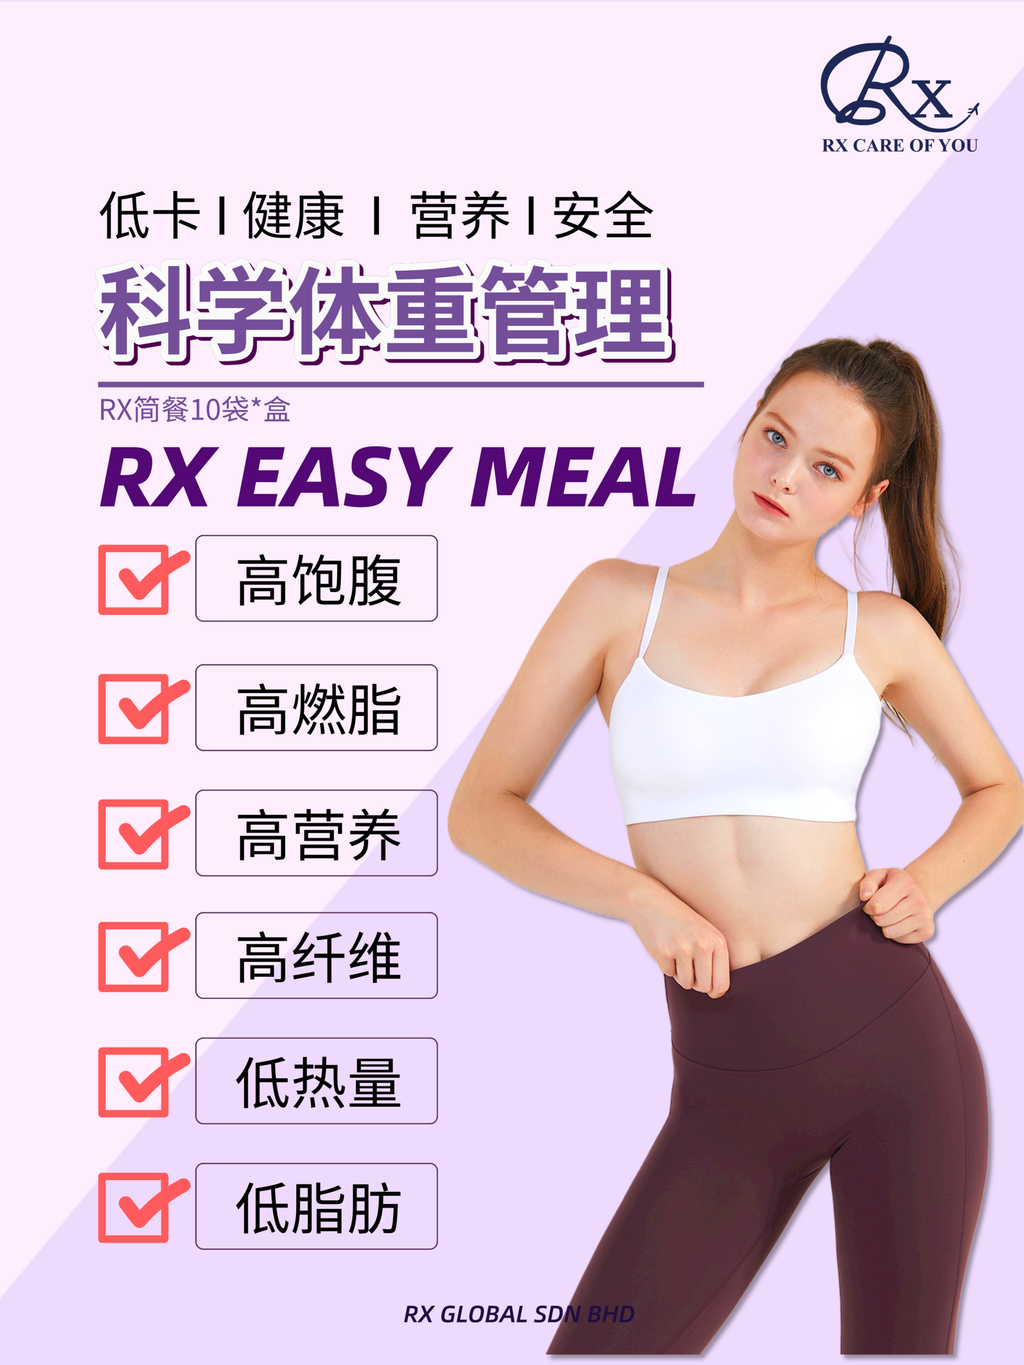 rx-easymeal1.png